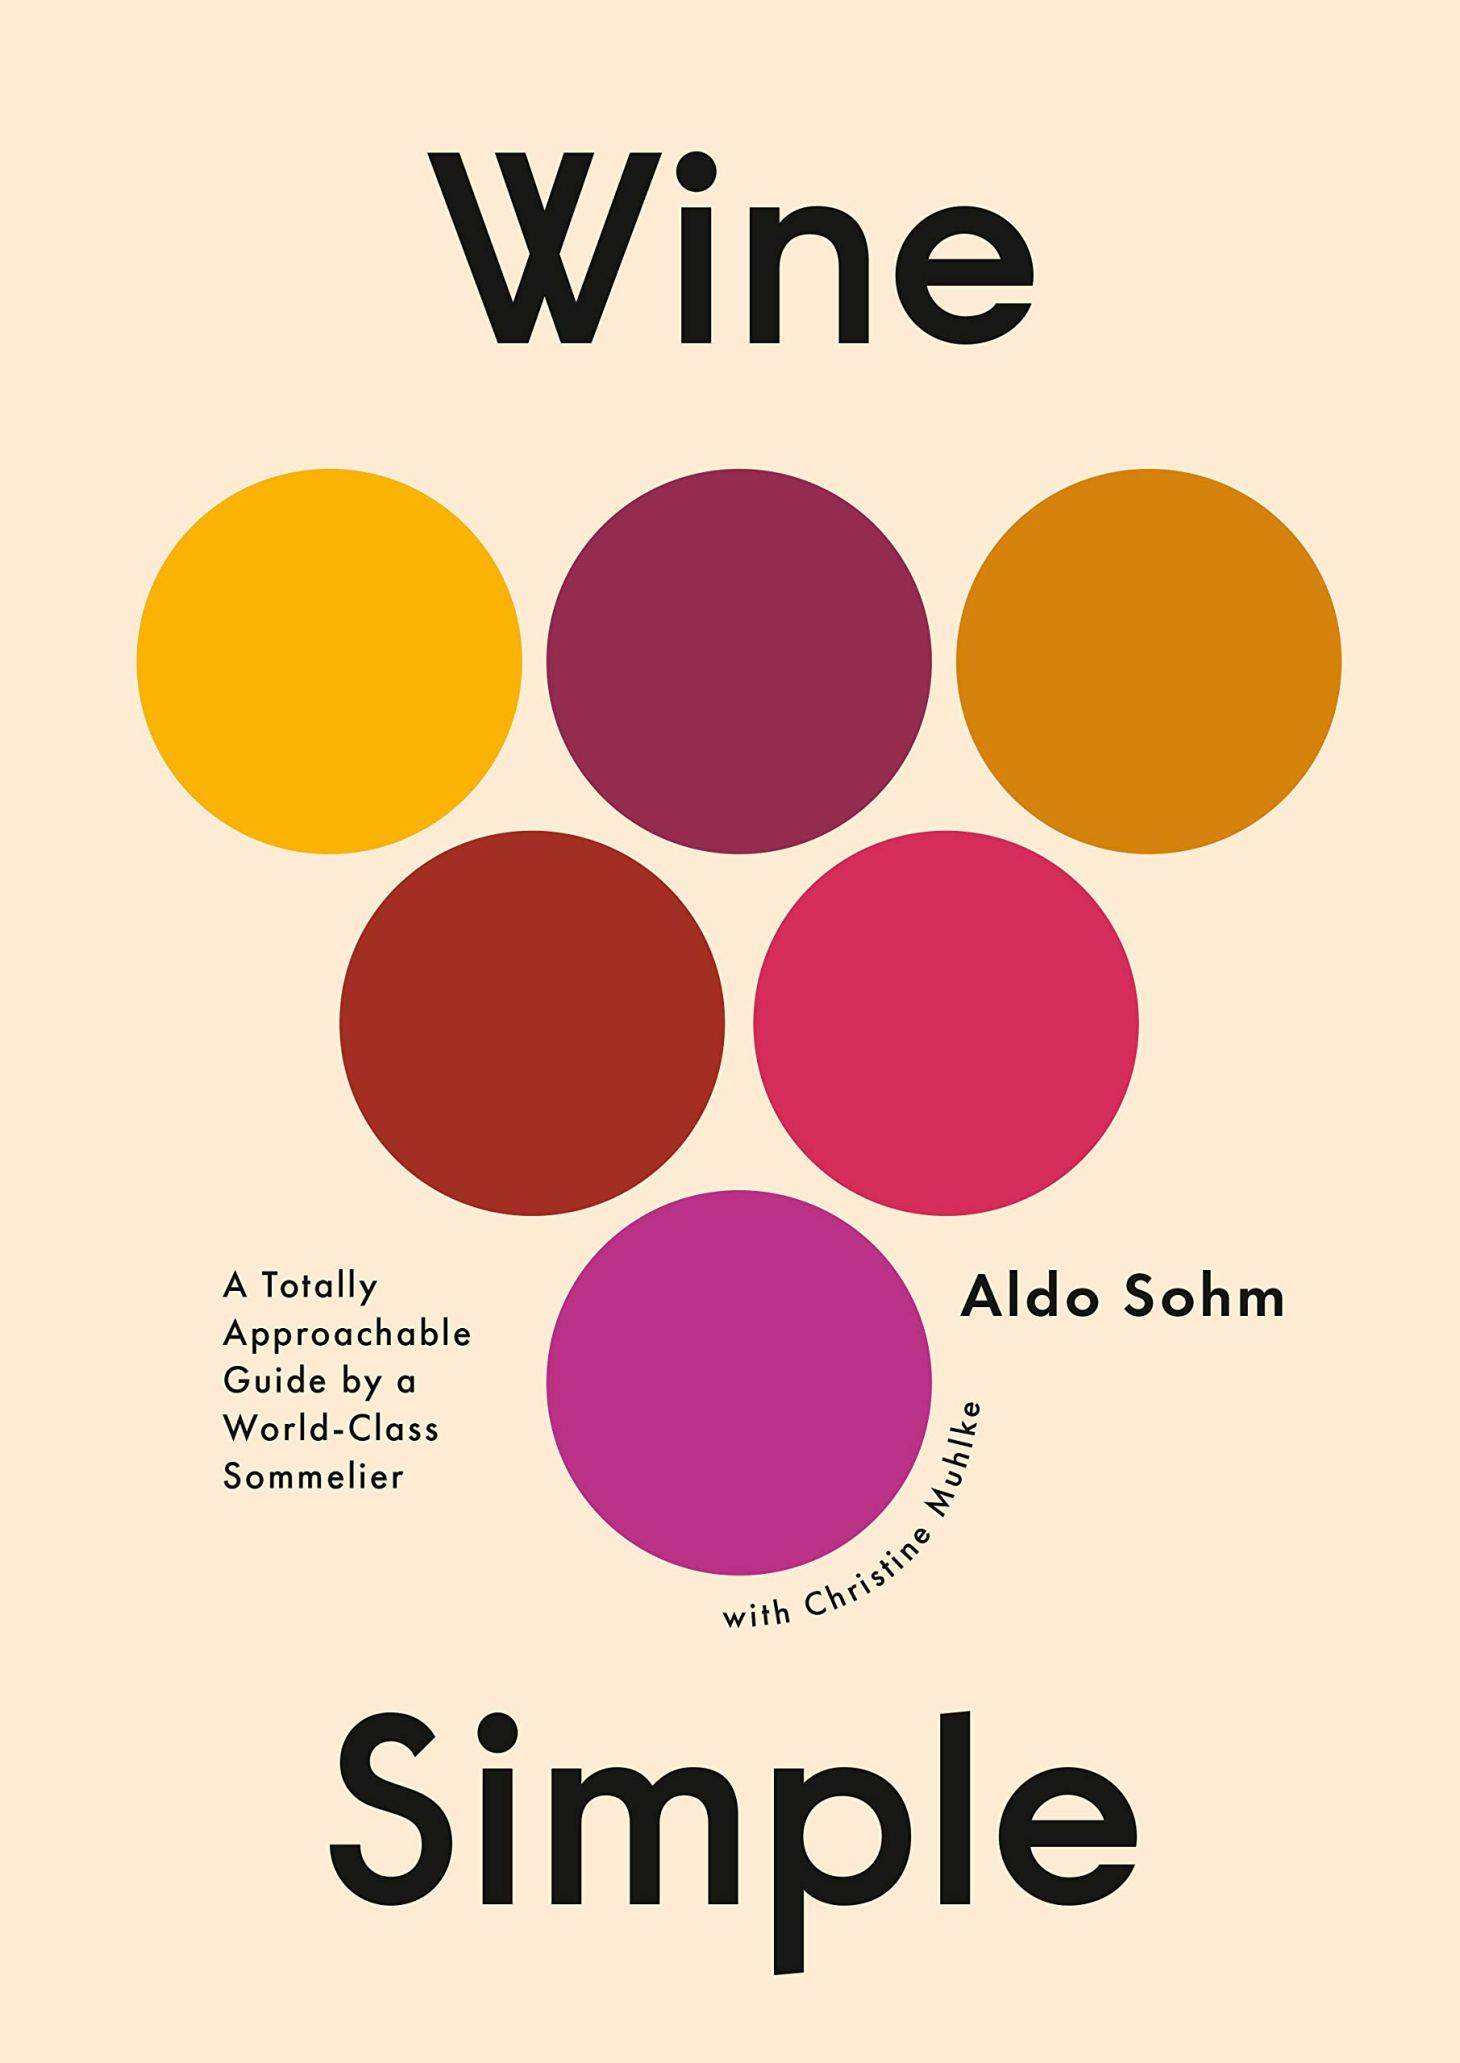 wine simple book, one of the best valentine's day gifts for couples